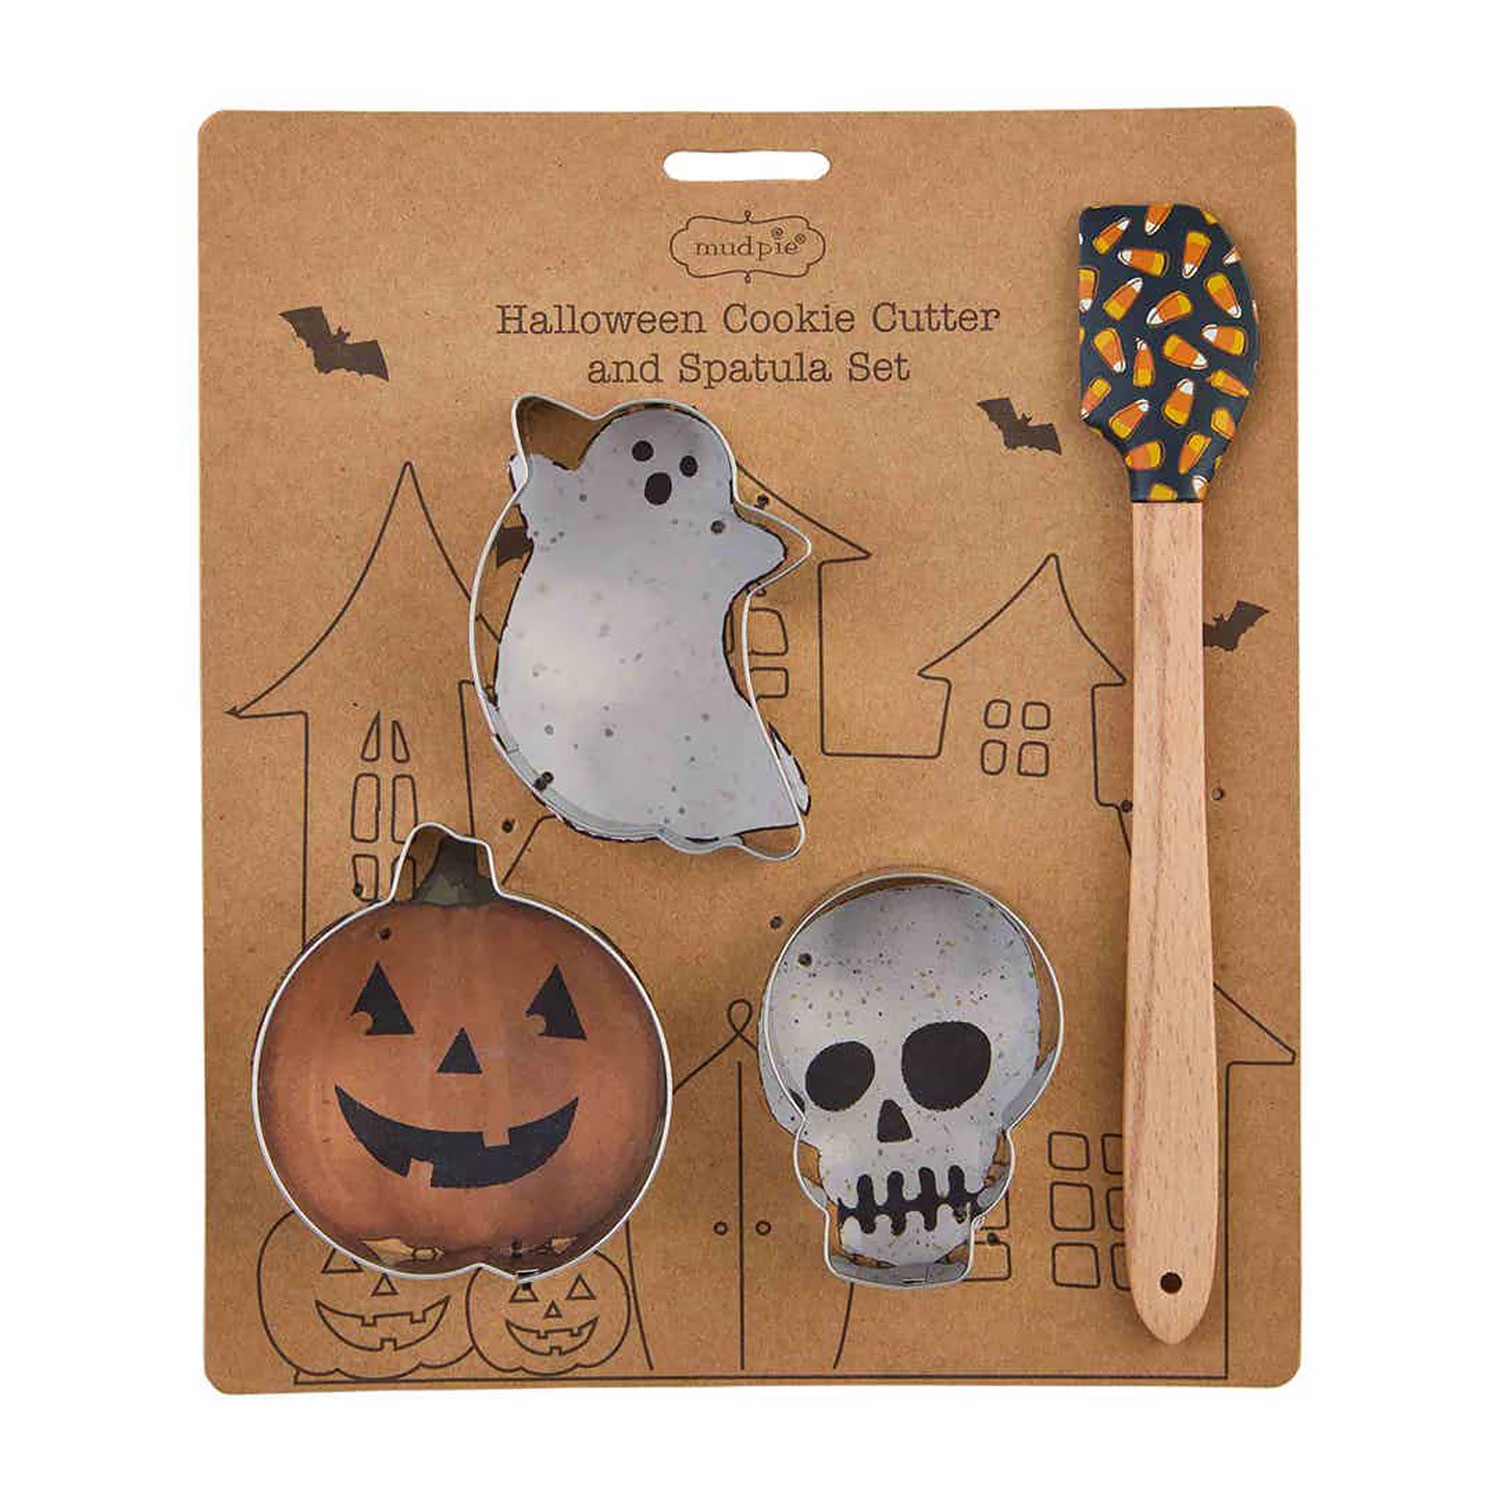 Halloween Cookie Cutter and Candy Corn Spatula Set